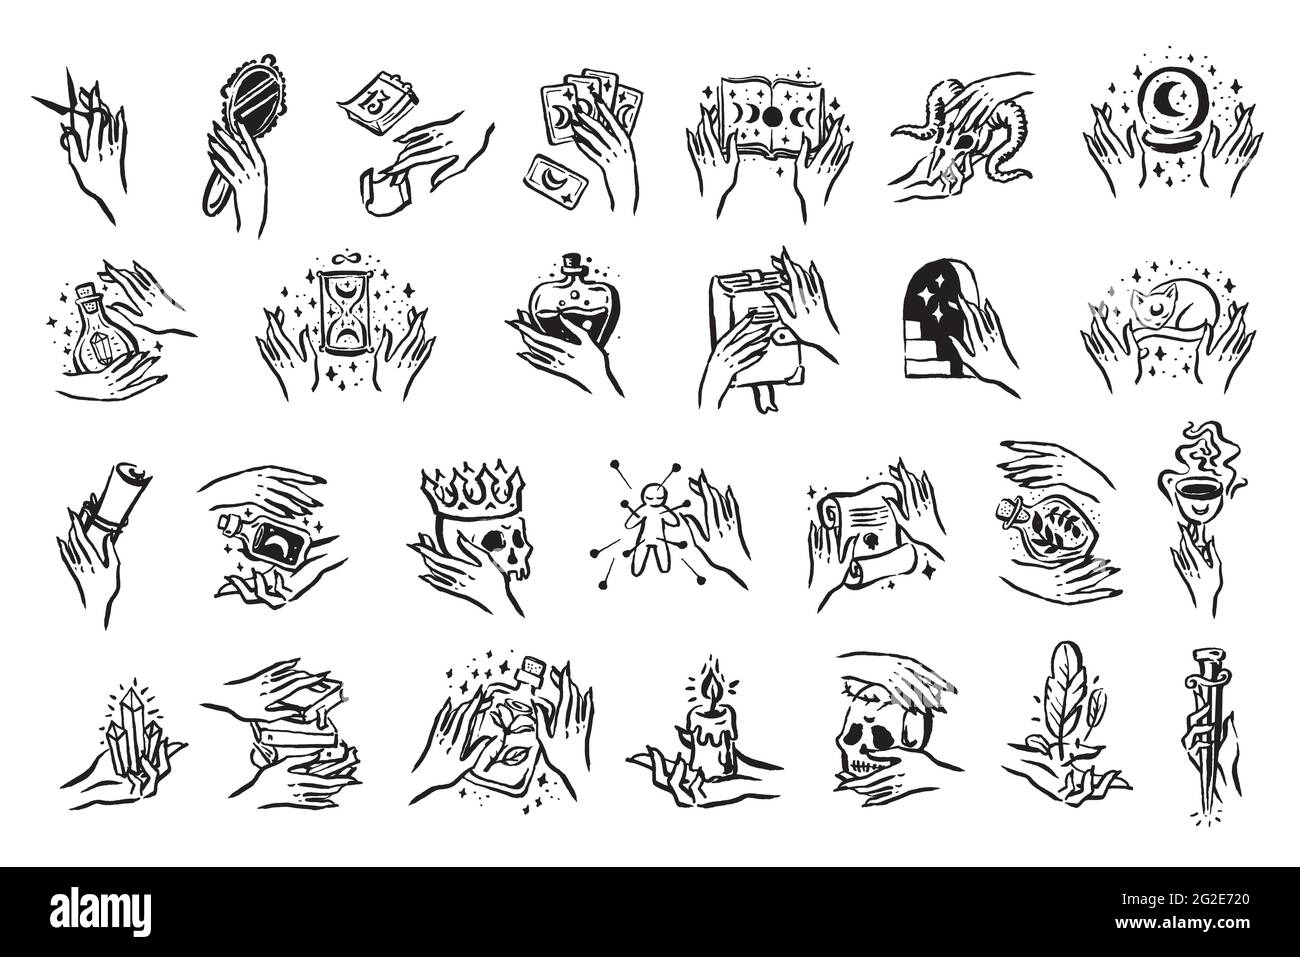 Mysticism witchcraft occult hand drawn icon illustration set Stock Vector